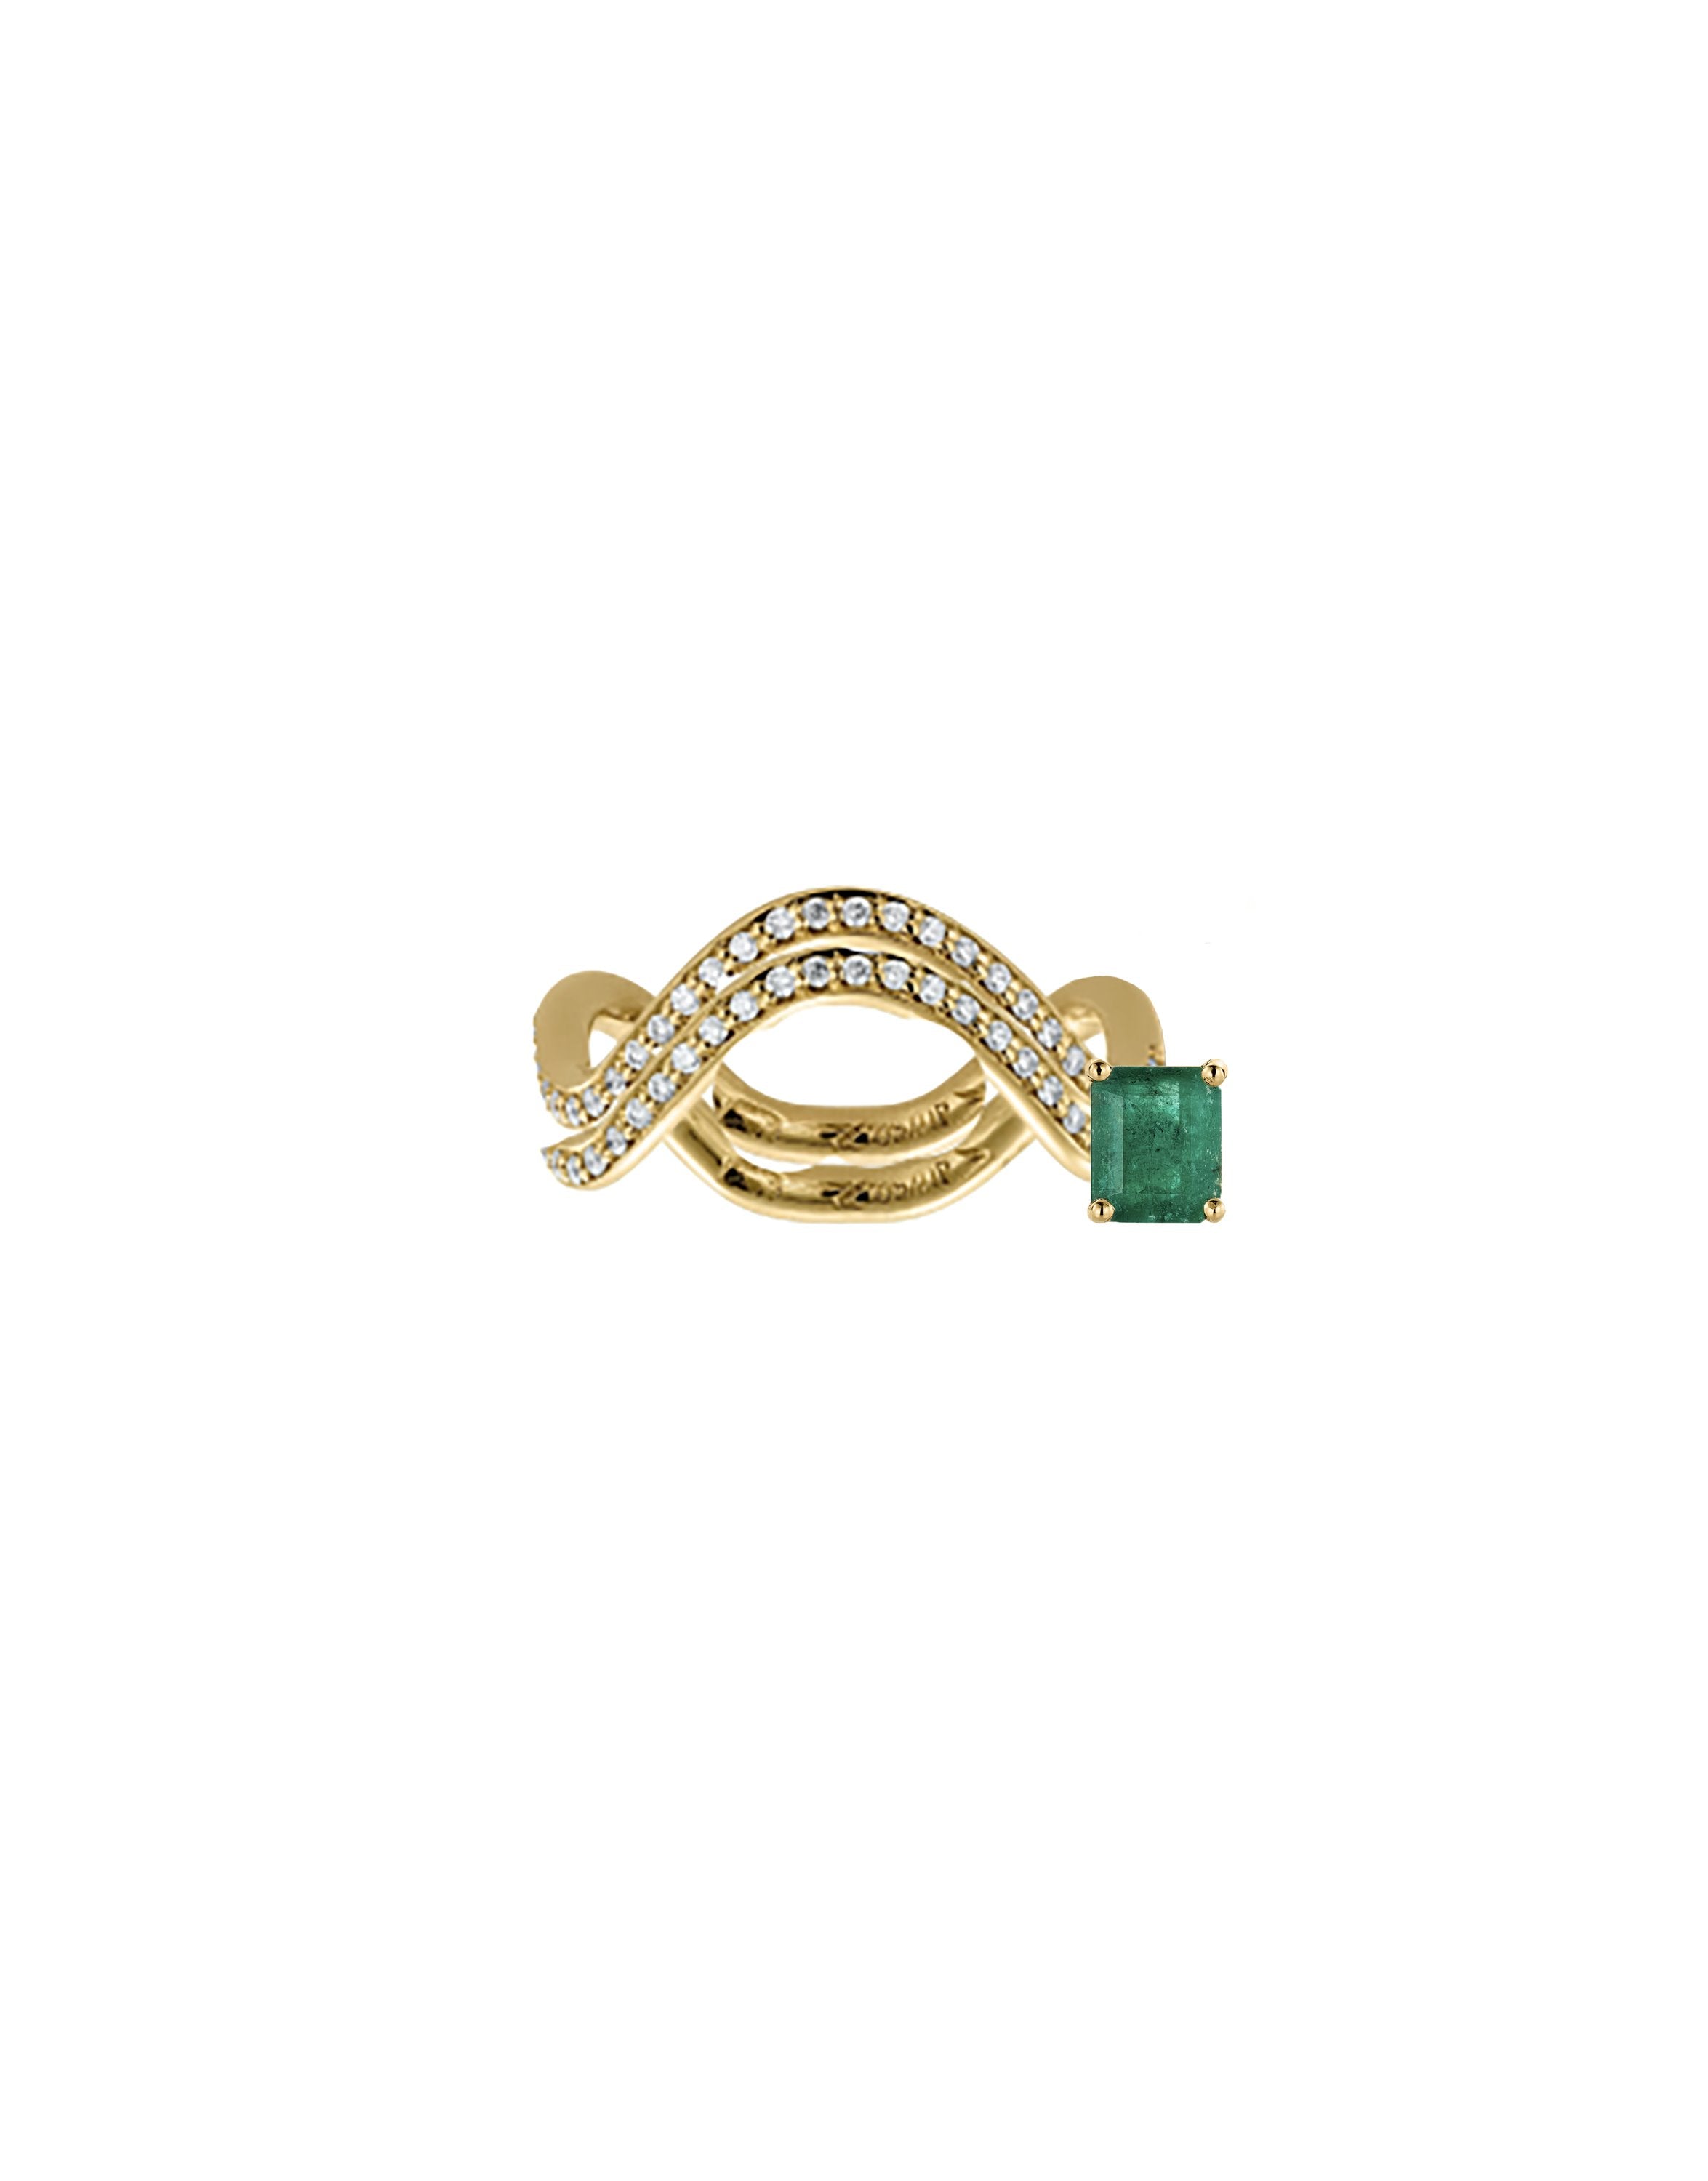 DOUBLE PETITE COMETE RING EMERALD AND DIAMOND Rings Nayestones 